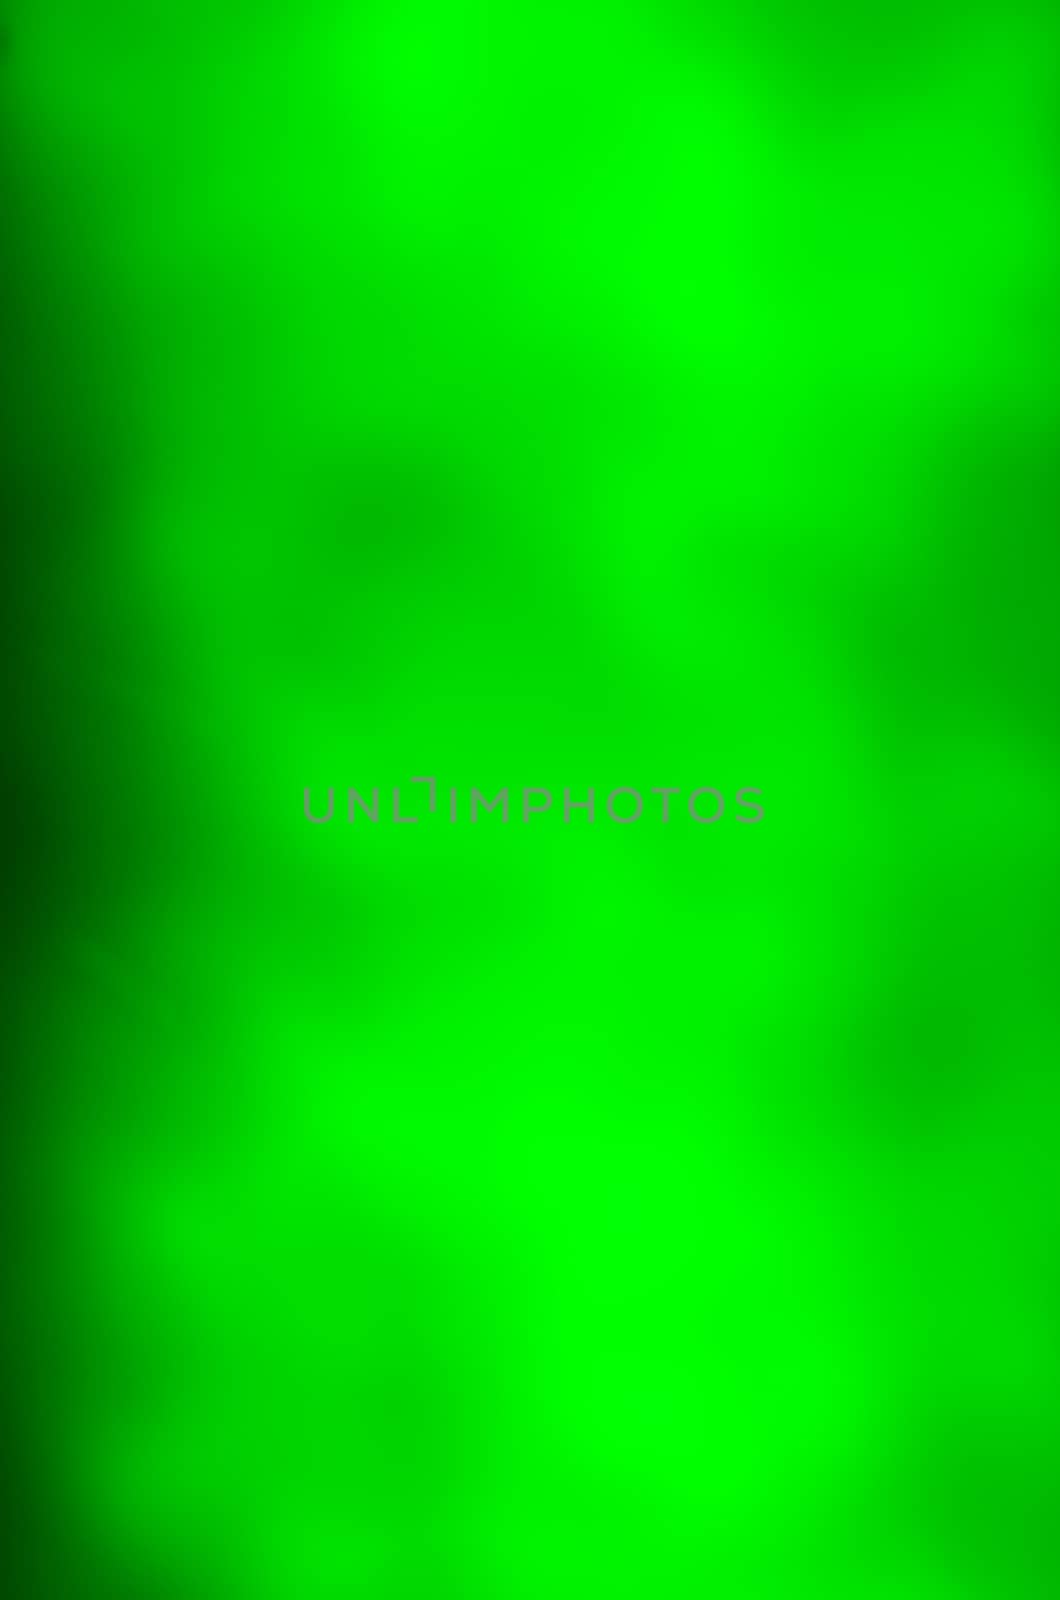 Abstract background blur green by aoo3771